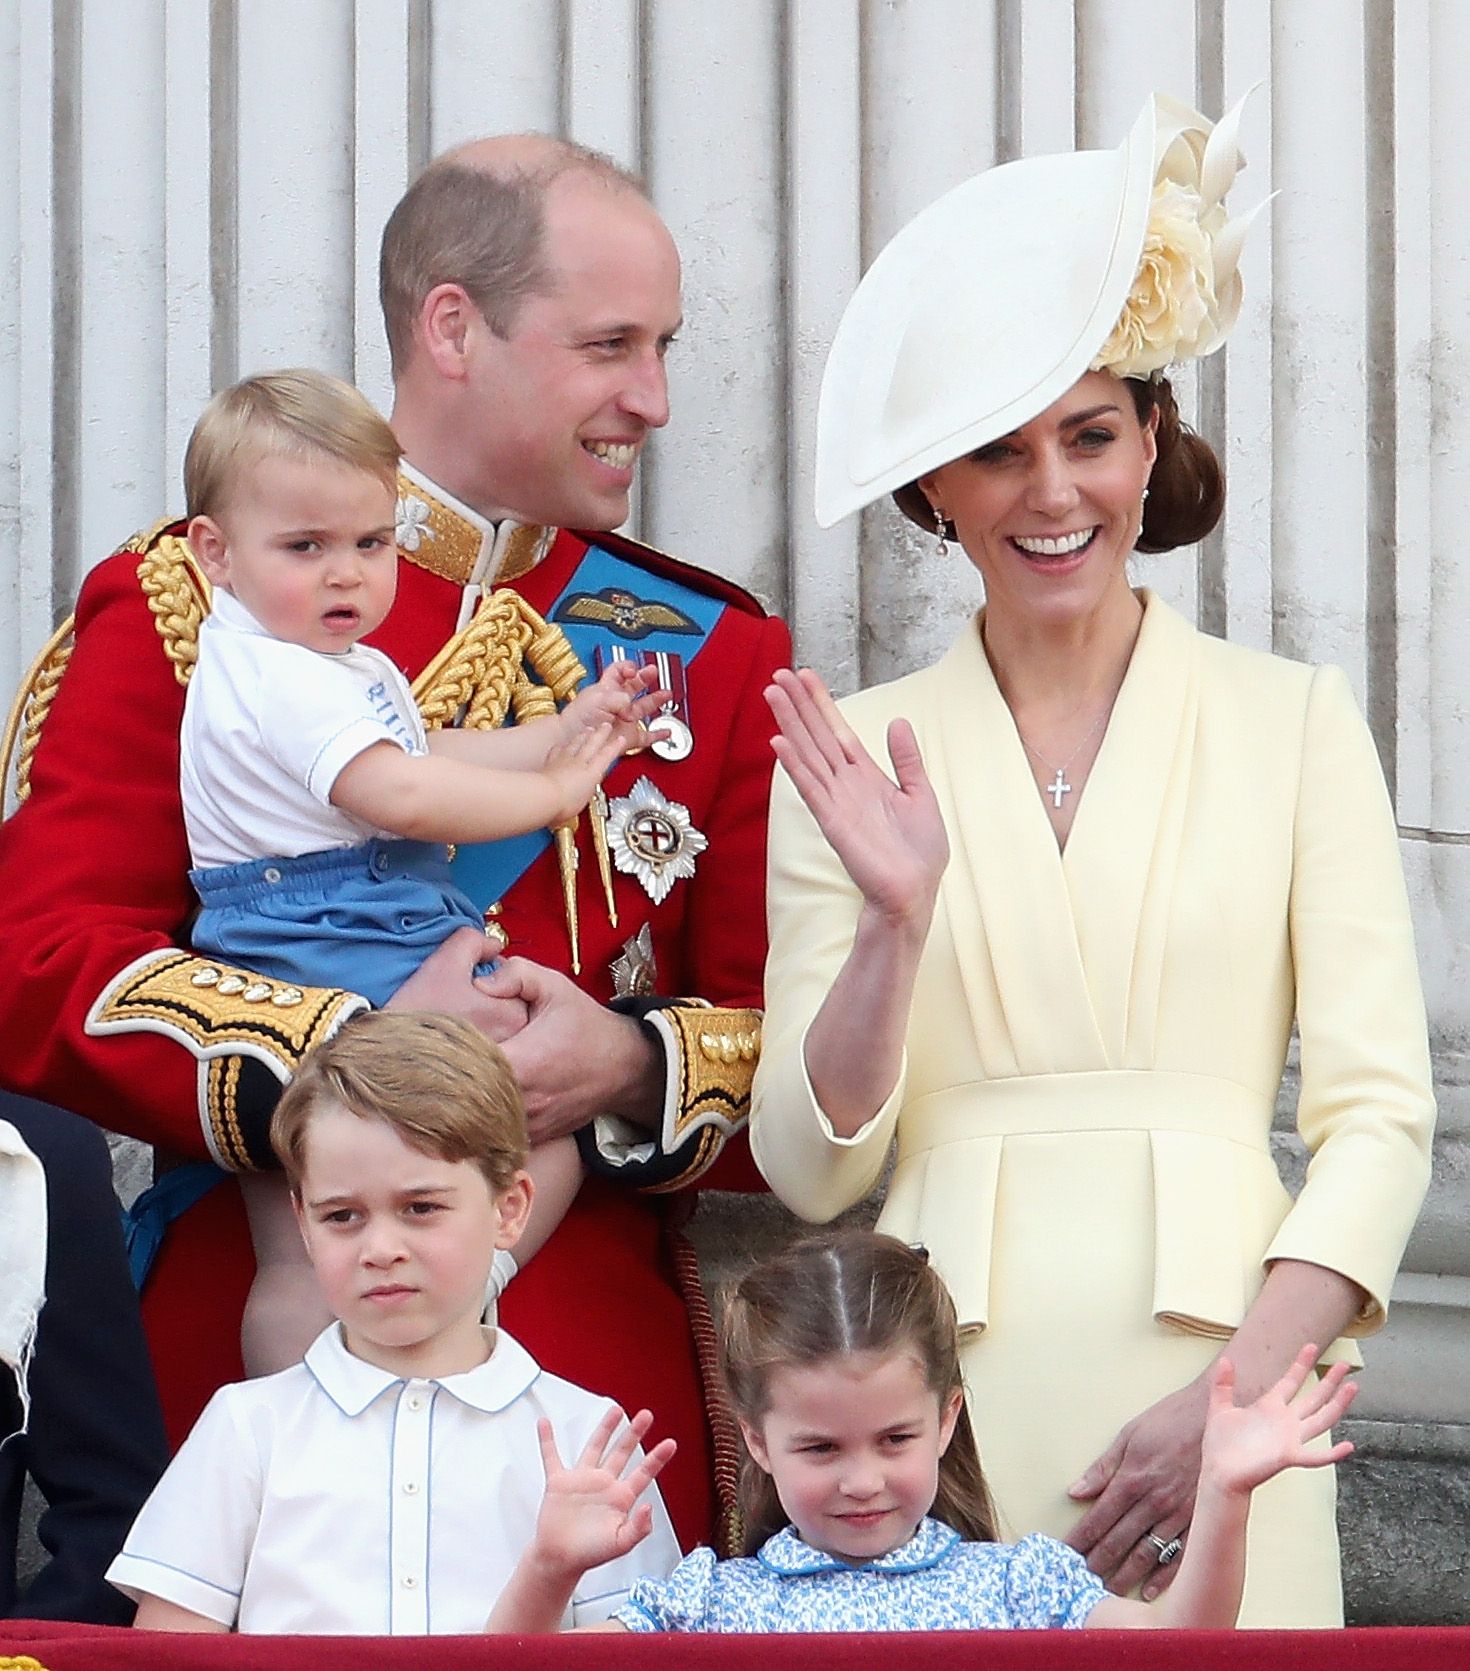 Prince William, Kate Middleton, Prince Louis, Prince George, and Princess Charlotte during Trooping The Colour on June 8, 2019 in London, England. | Photo: Getty Images.